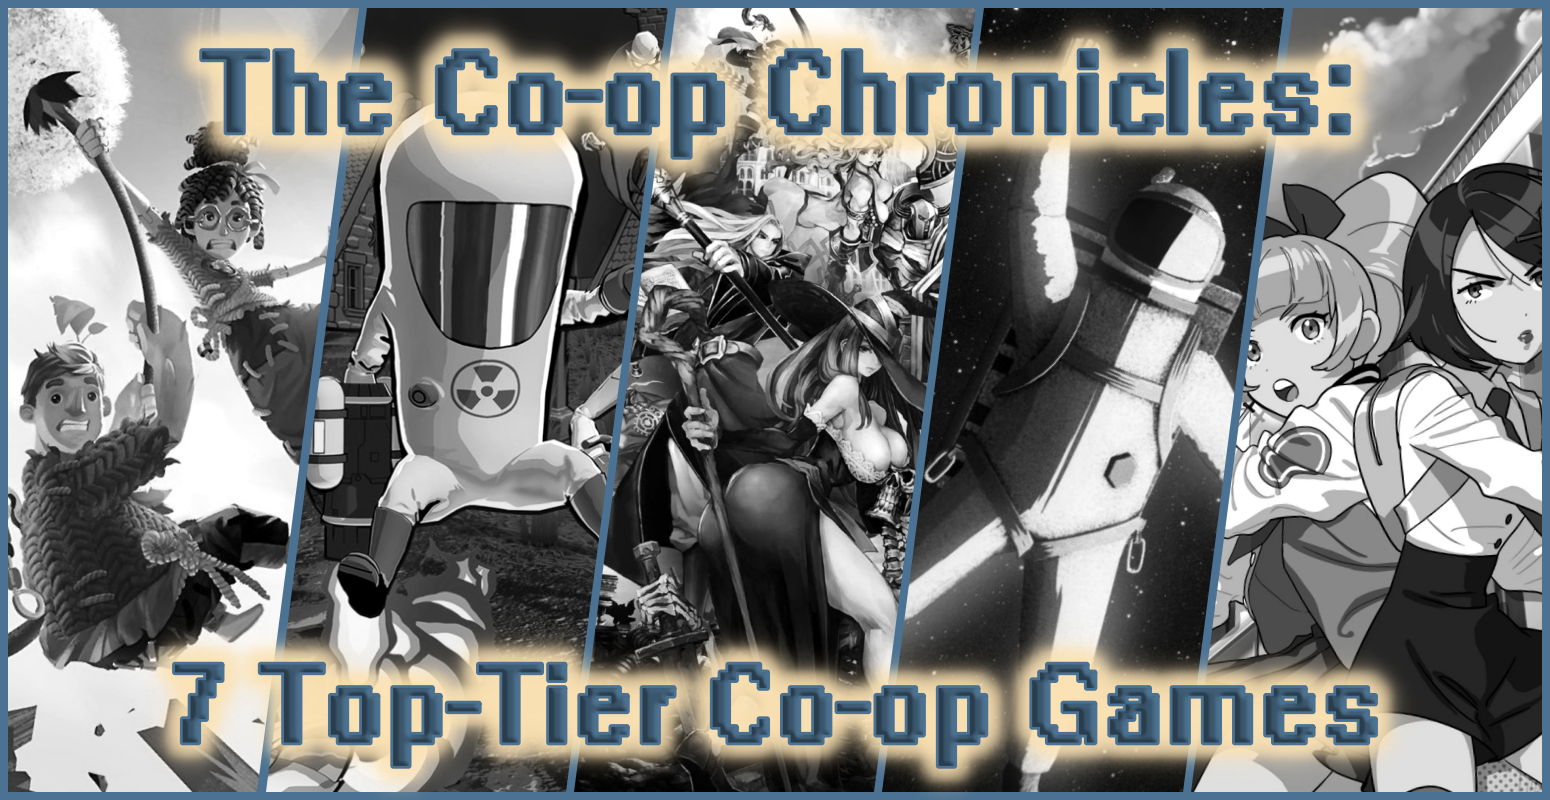 The Co-op Chronicles: 7 Top-Tier Co-op Games